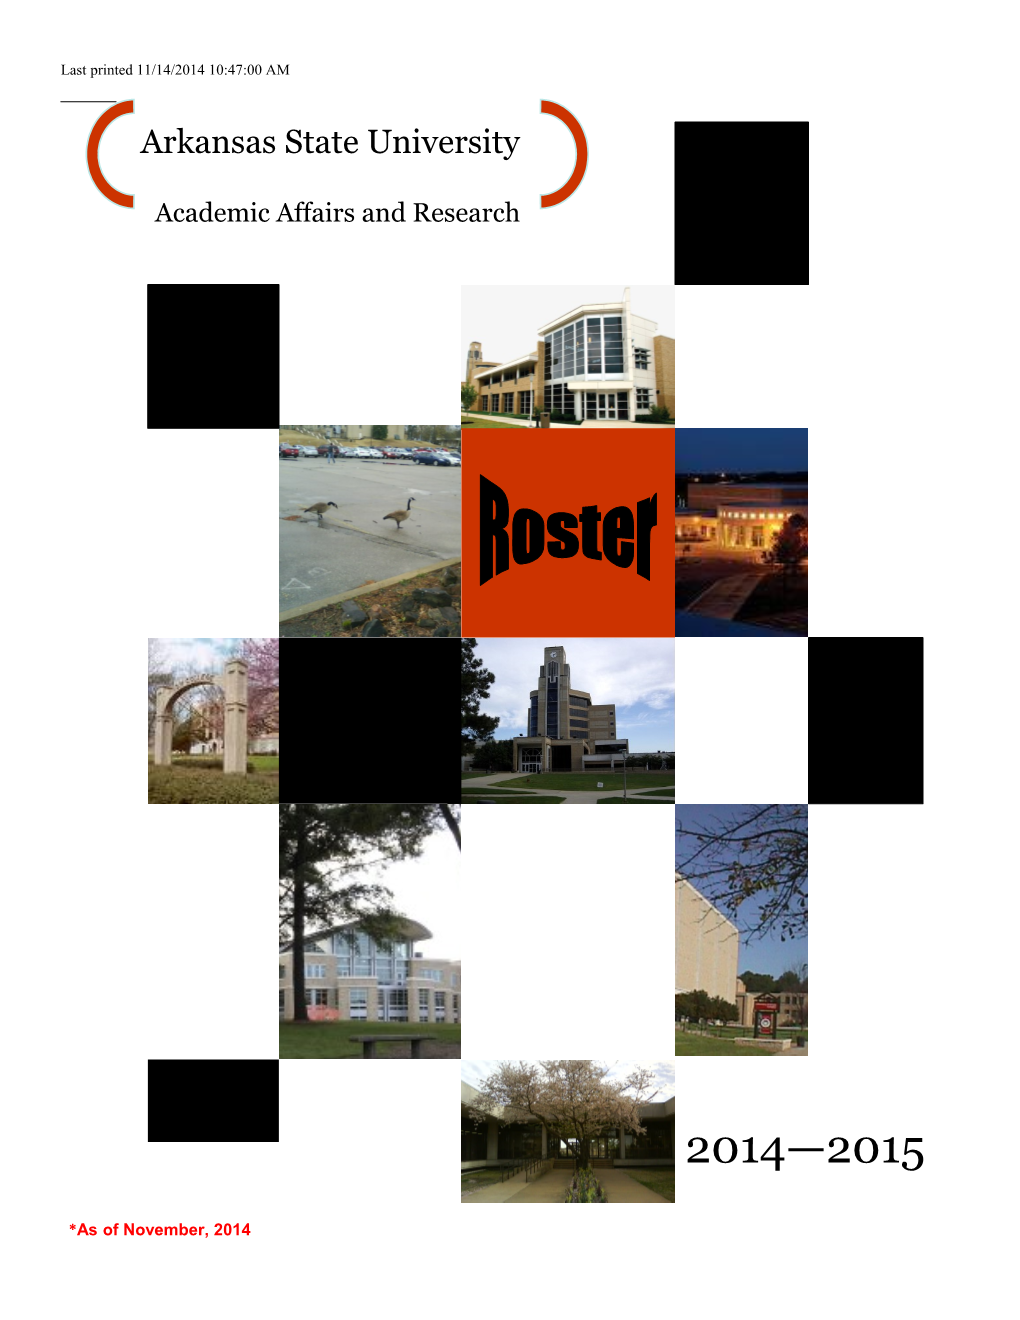 Academic Affairs and Research(Office of the Provost) 5